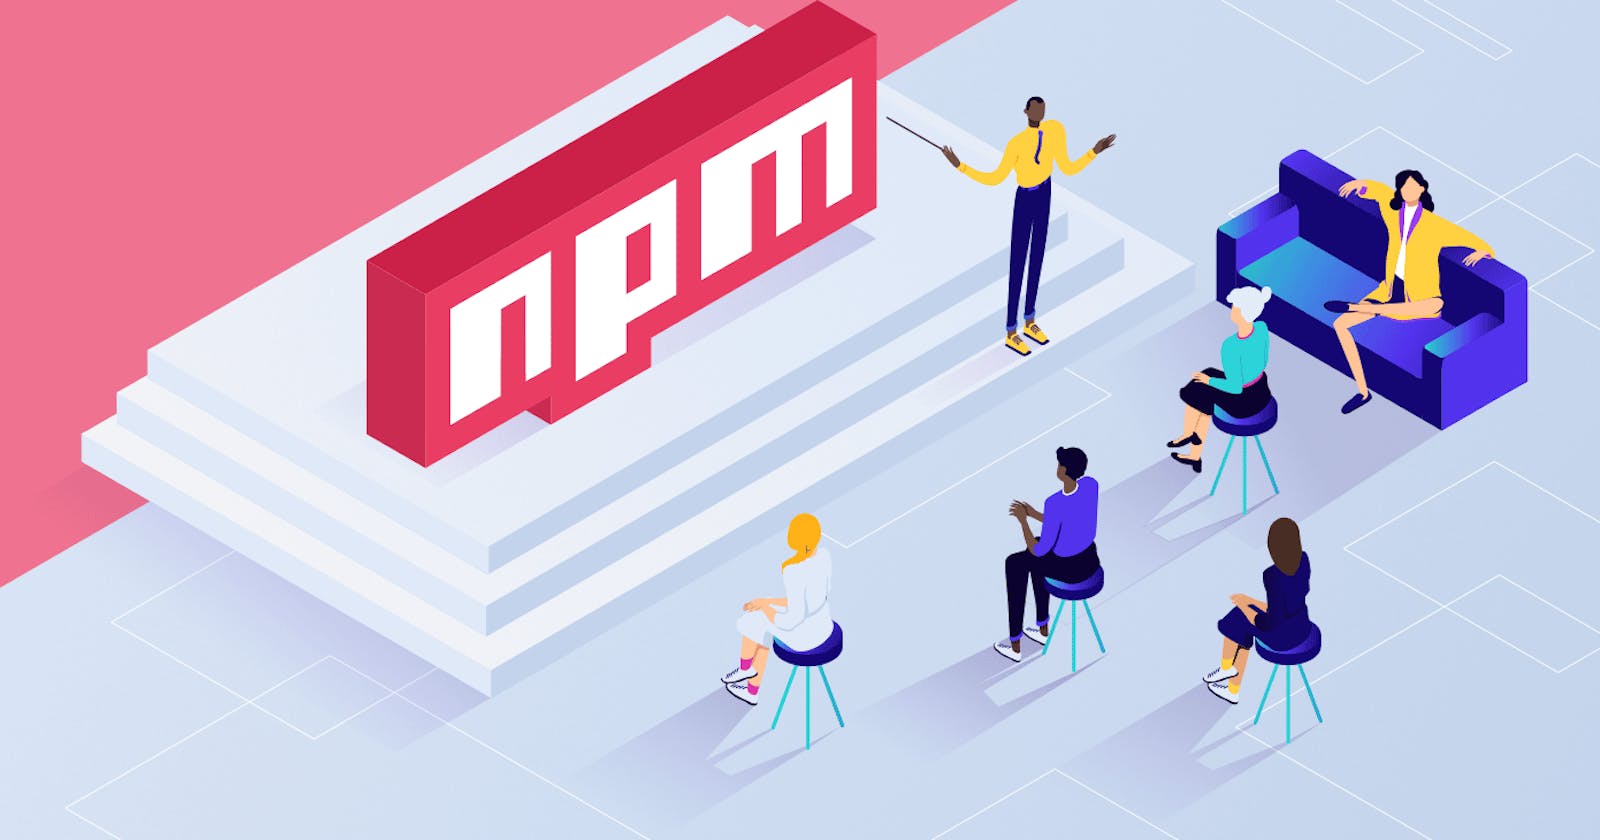 Publishing your first npm package